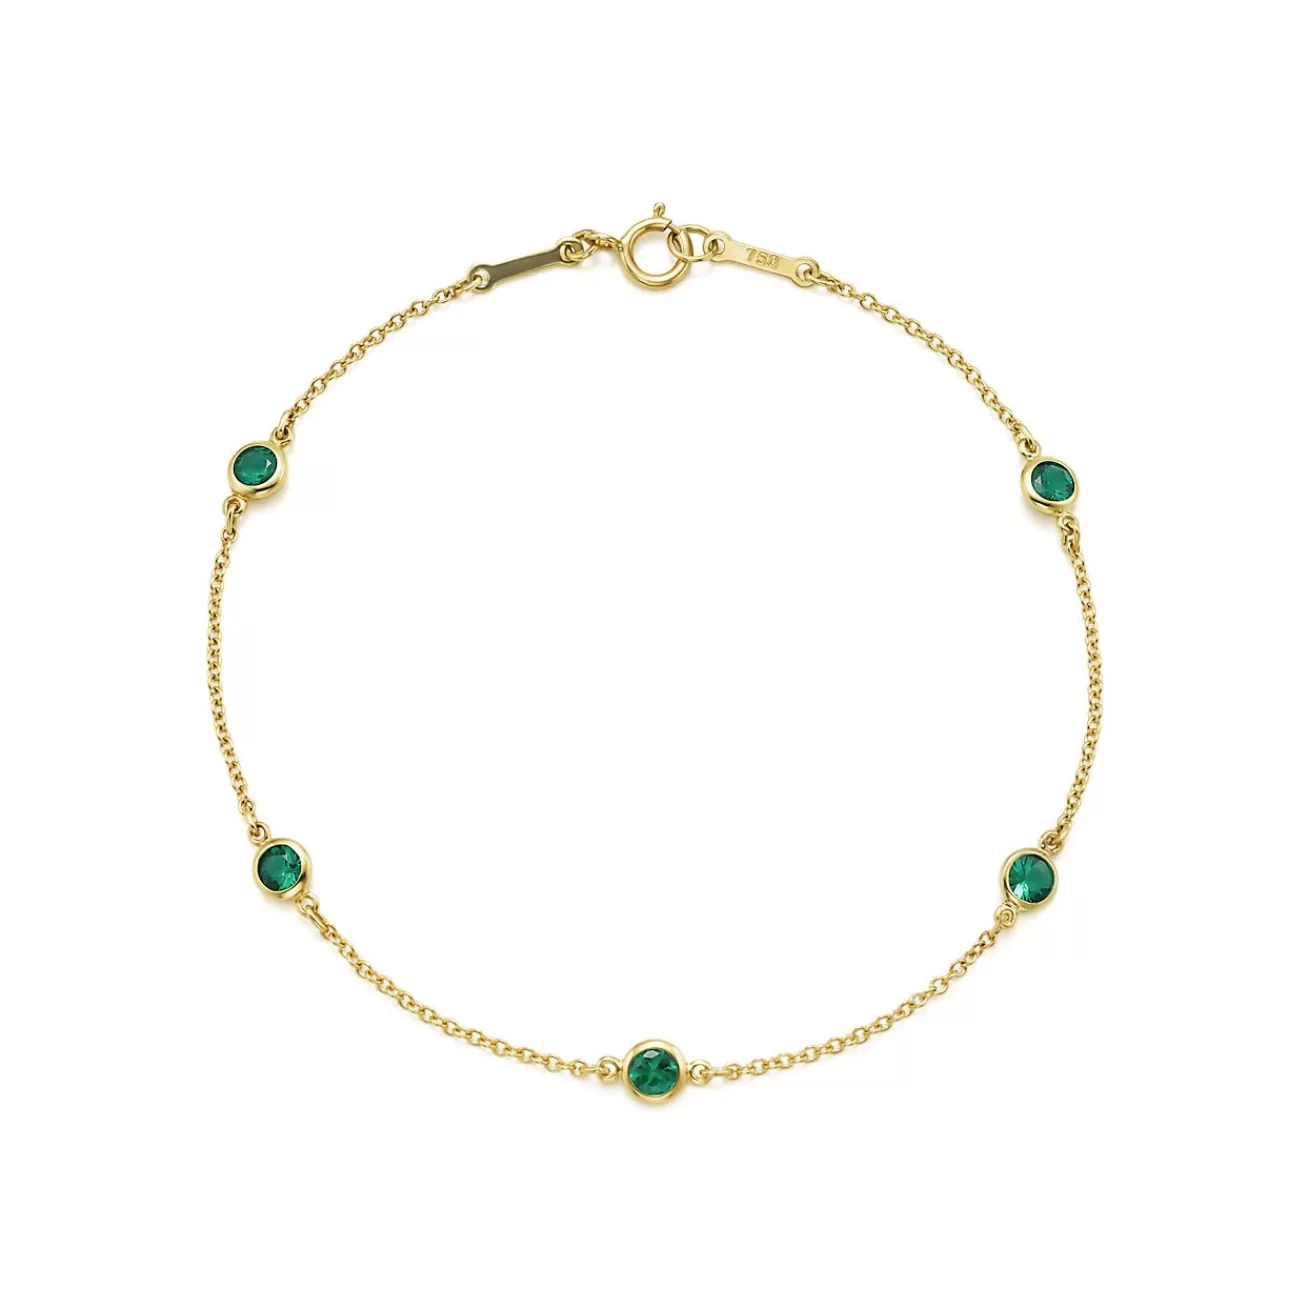 Tiffany & Co. Elsa Peretti® Color by the Yard bracelet in 18k gold with emeralds. | ^ Bracelets | Gold Jewelry